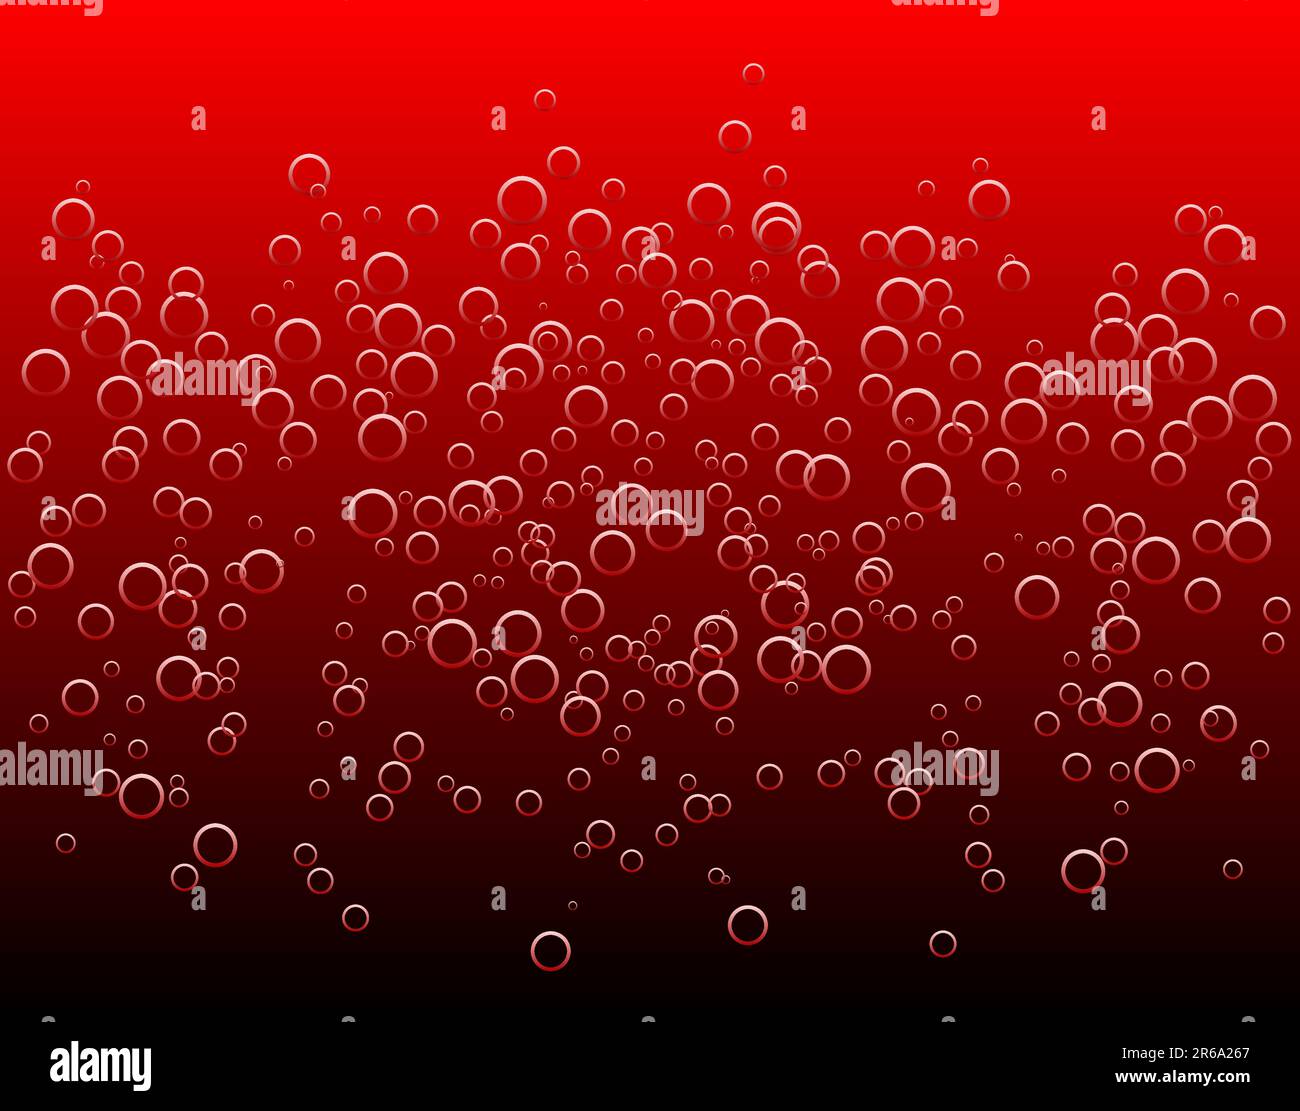 Abstract vector background of a bubbling liquid Stock Vector